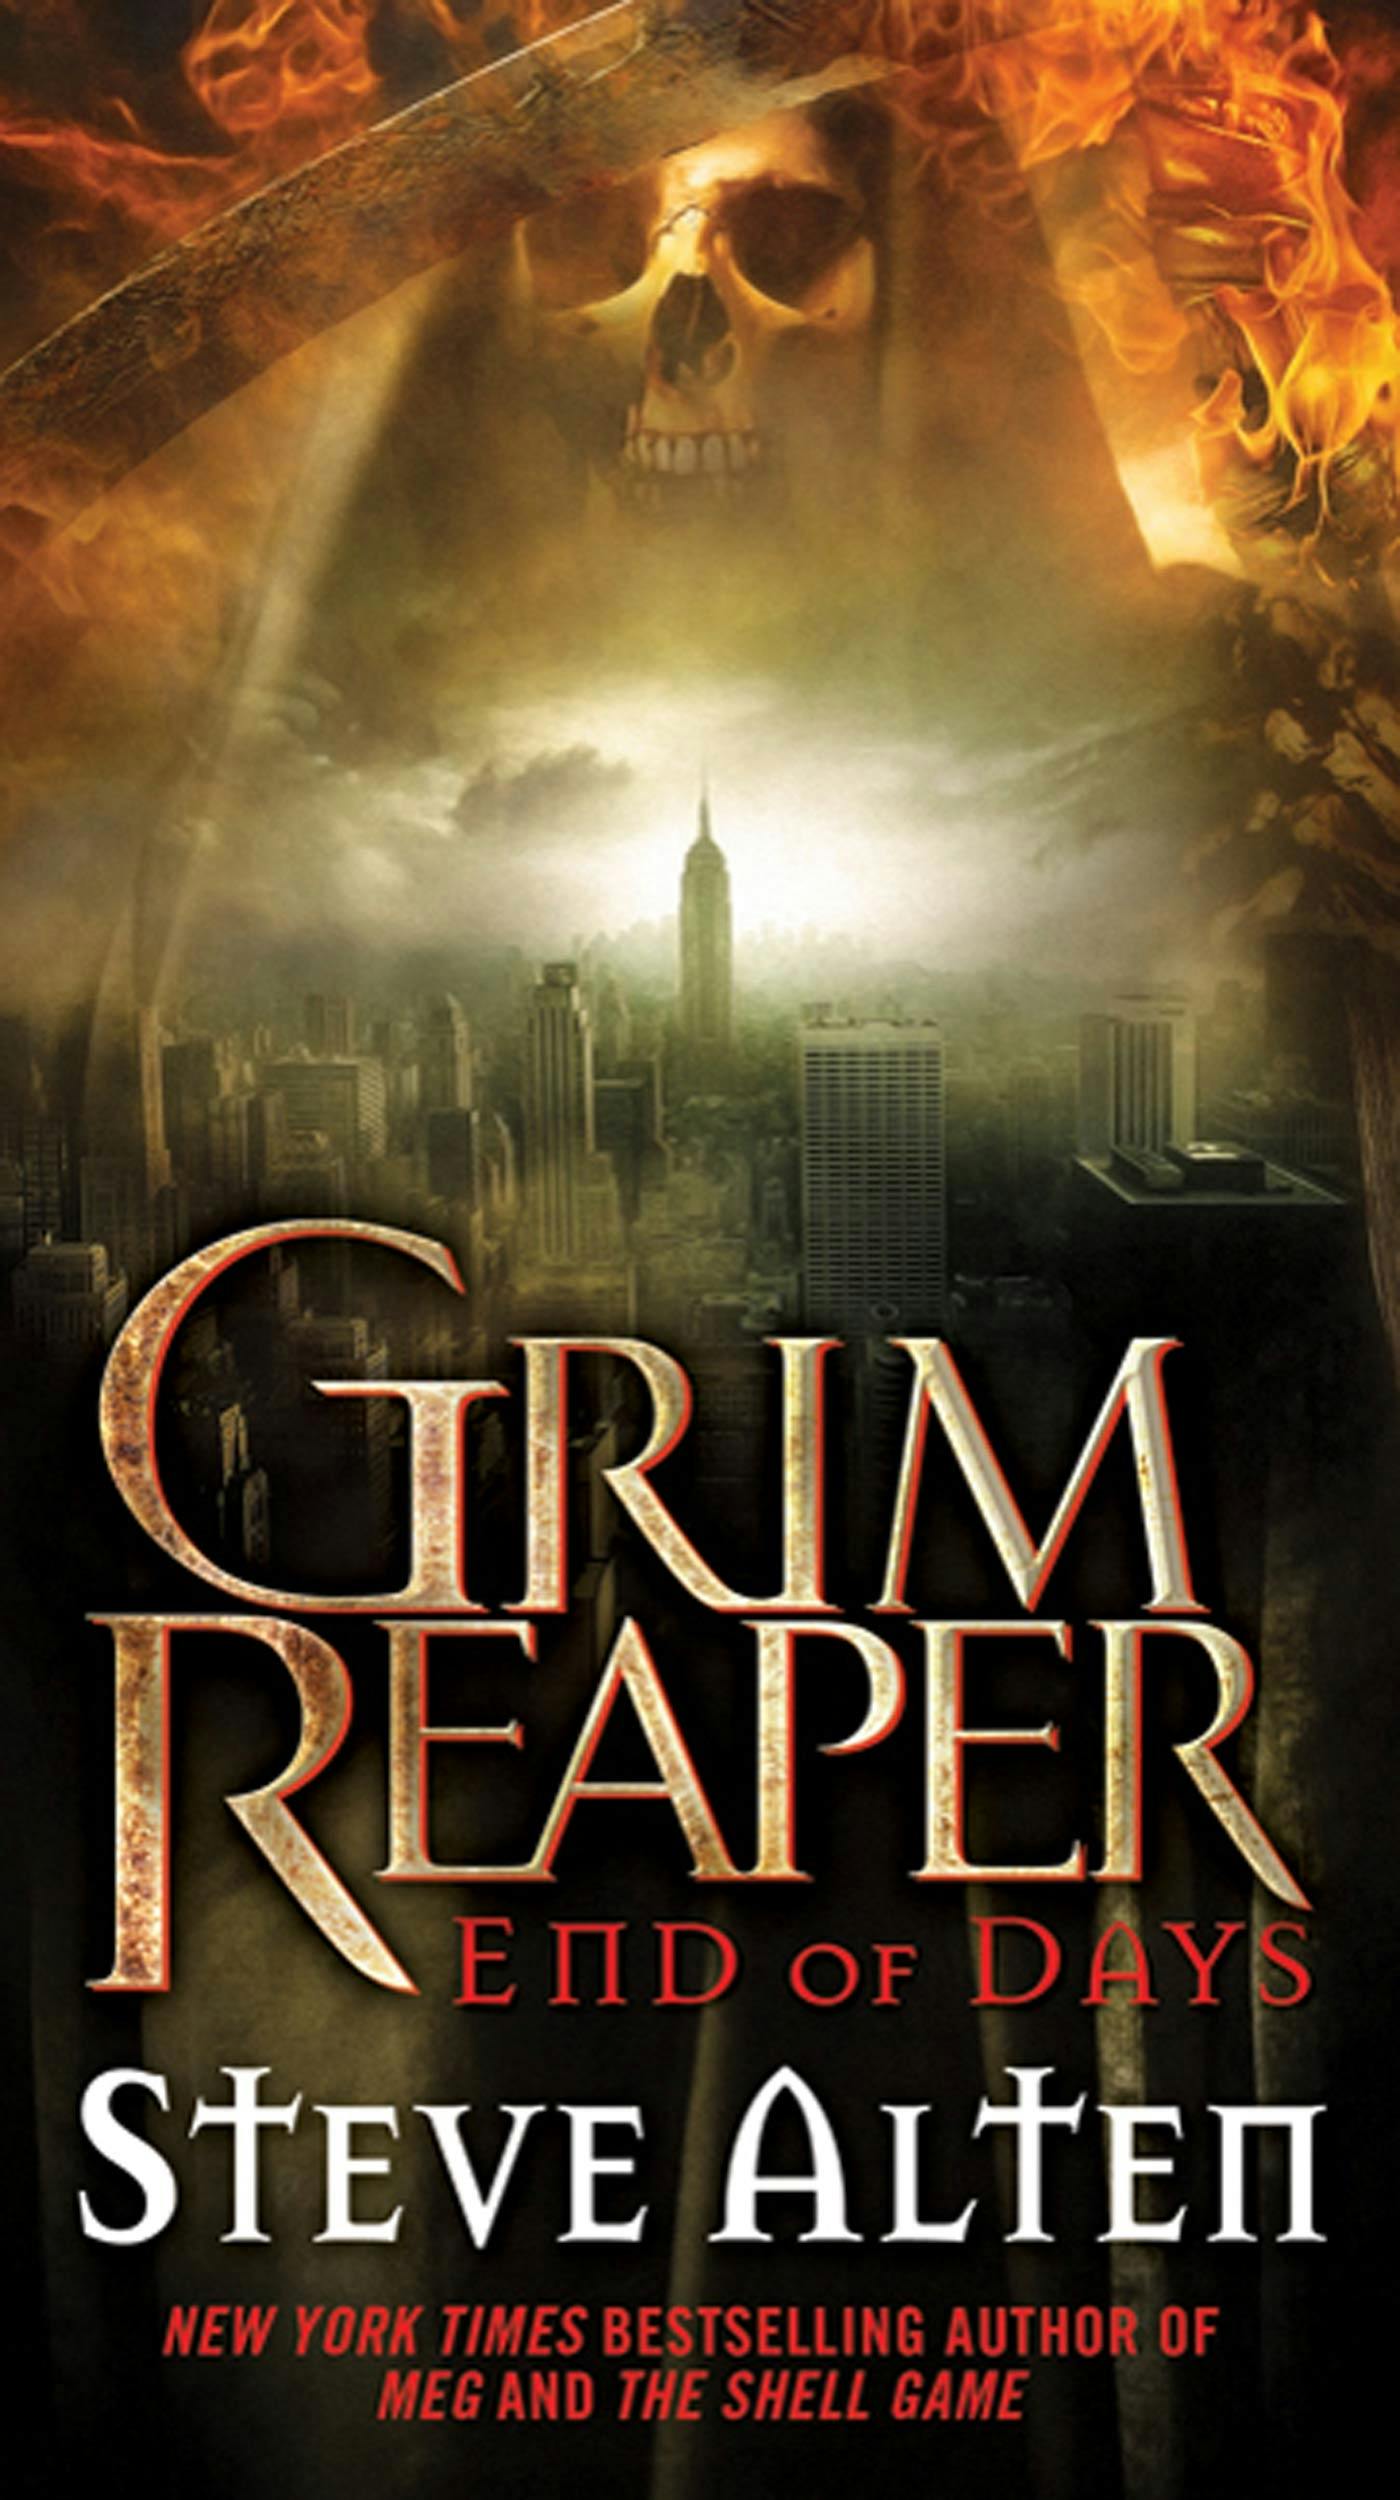 Cover for the book titled as: Grim Reaper: End of Days